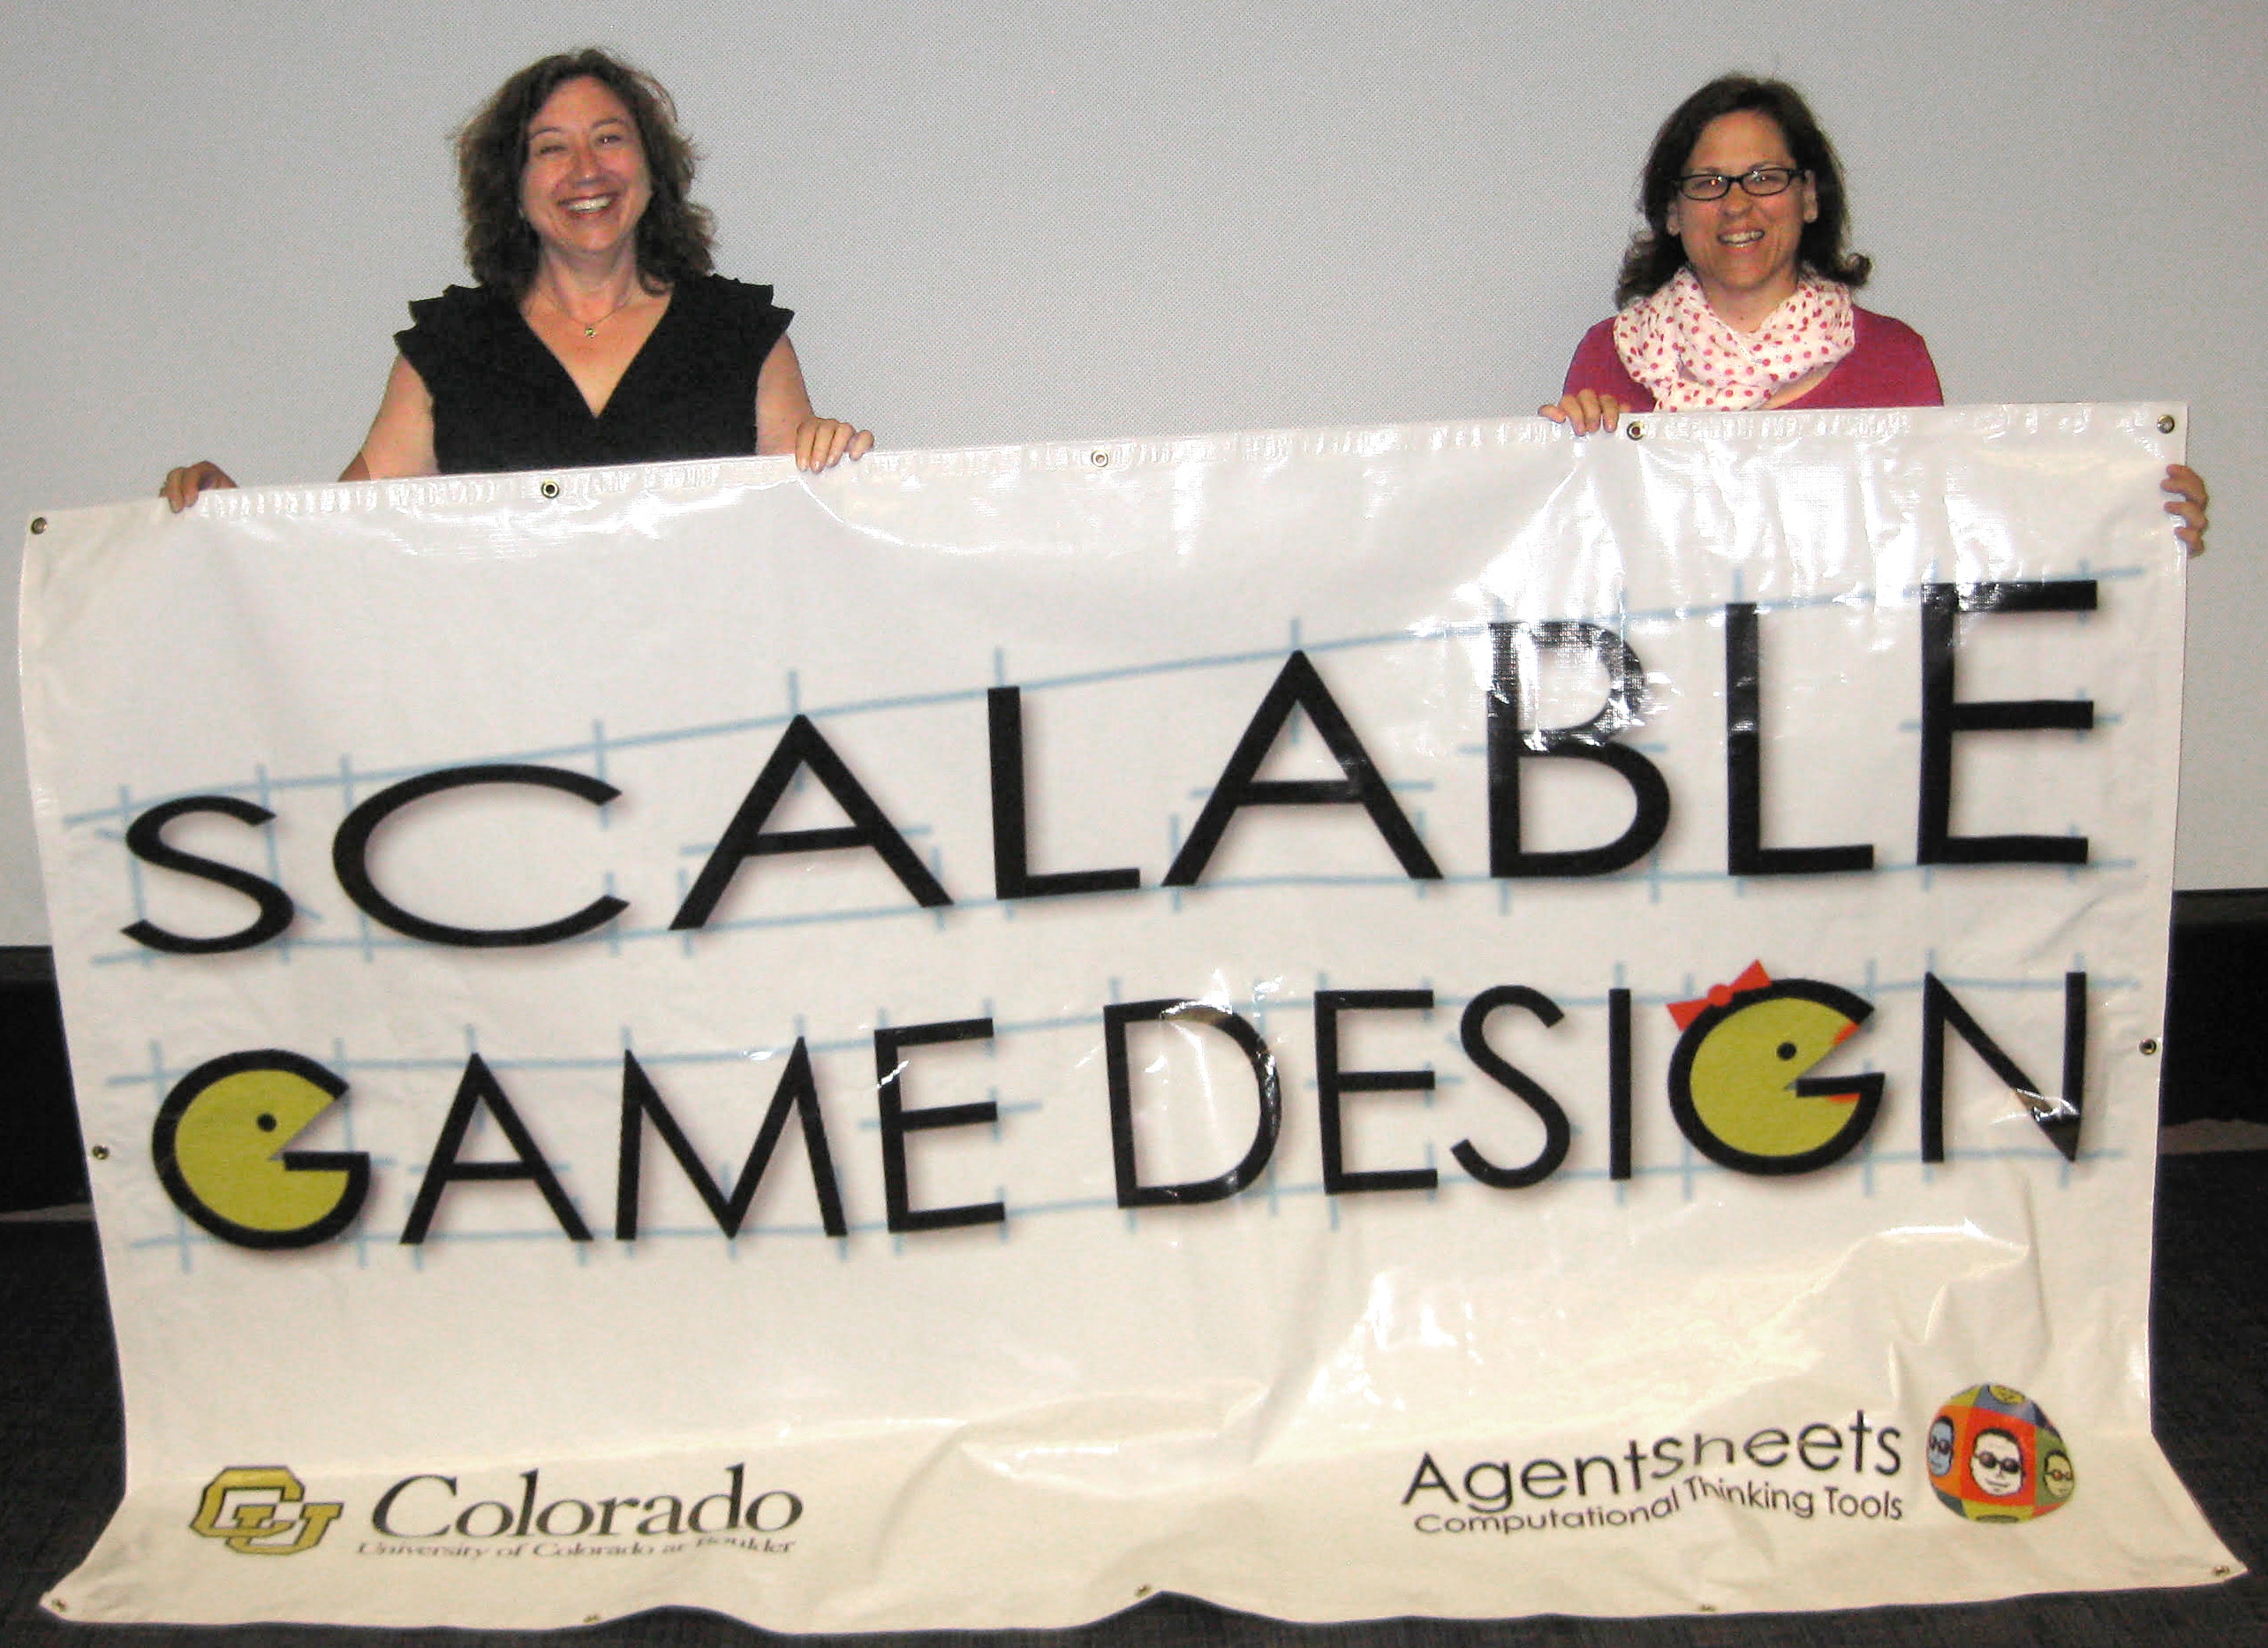 Two founder of Scalable Game Design holding a Scalable Game Design sign.